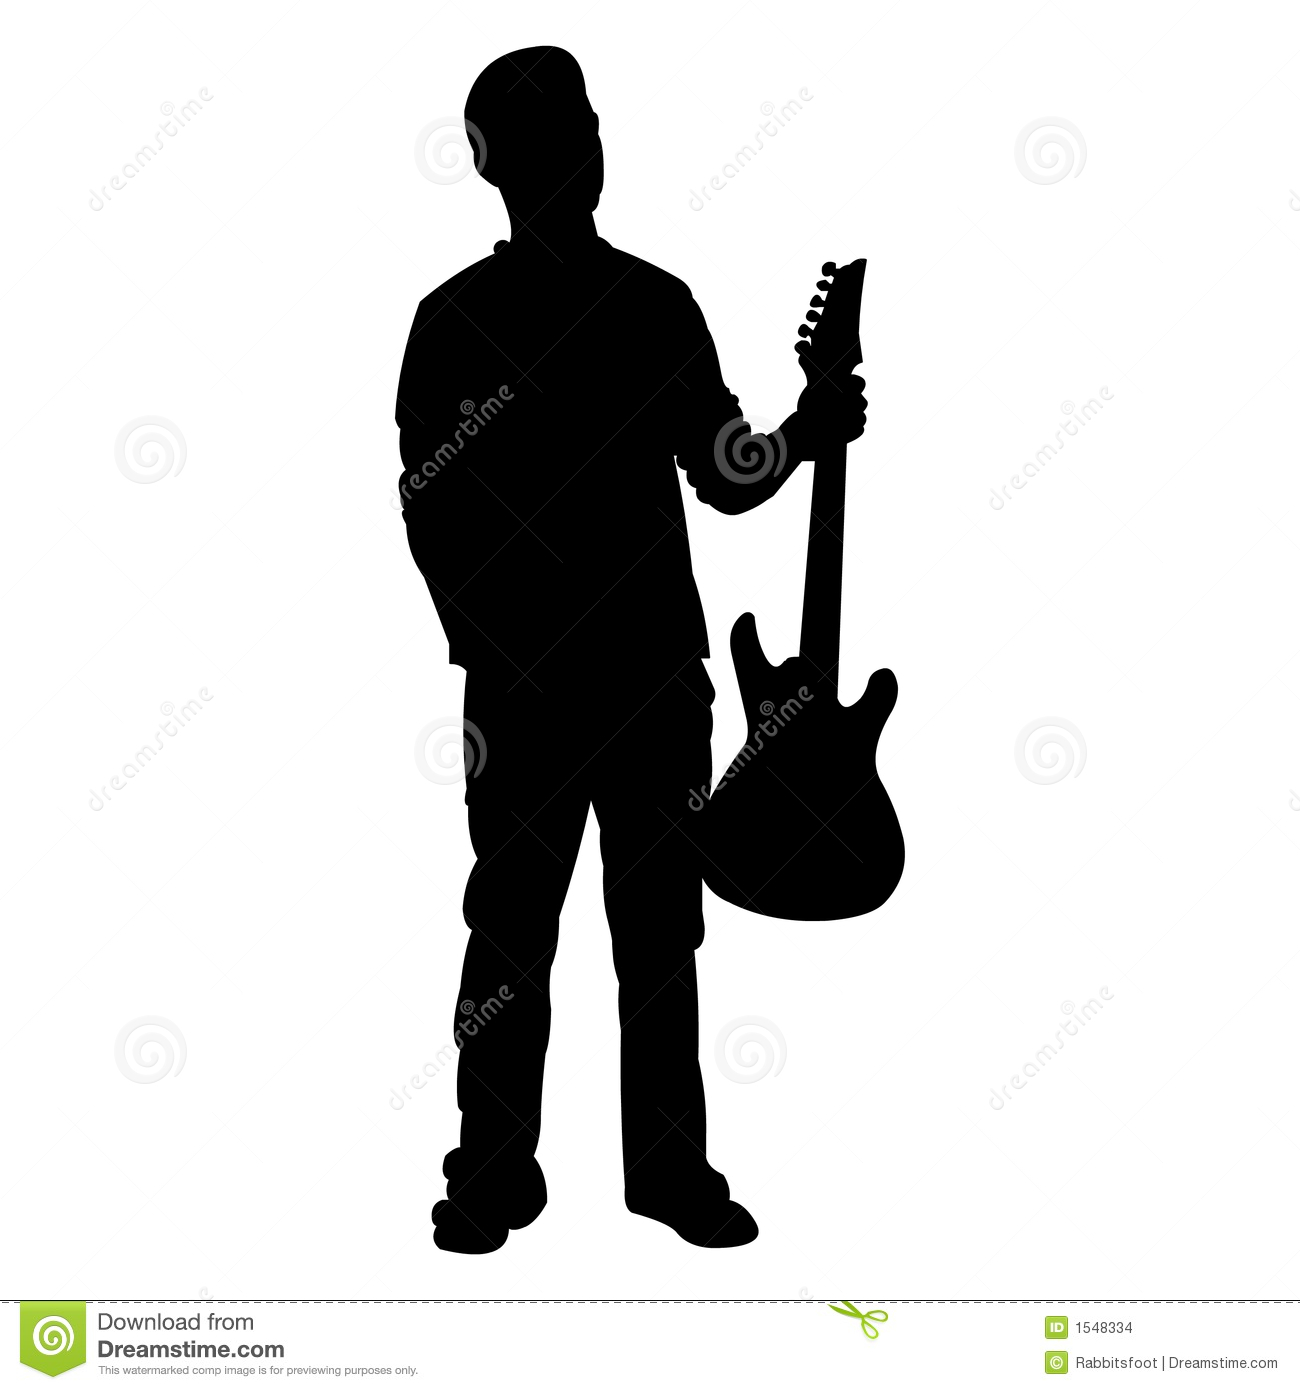 Teen Guitar Player   Silhouette Stock Images   Image  1548334